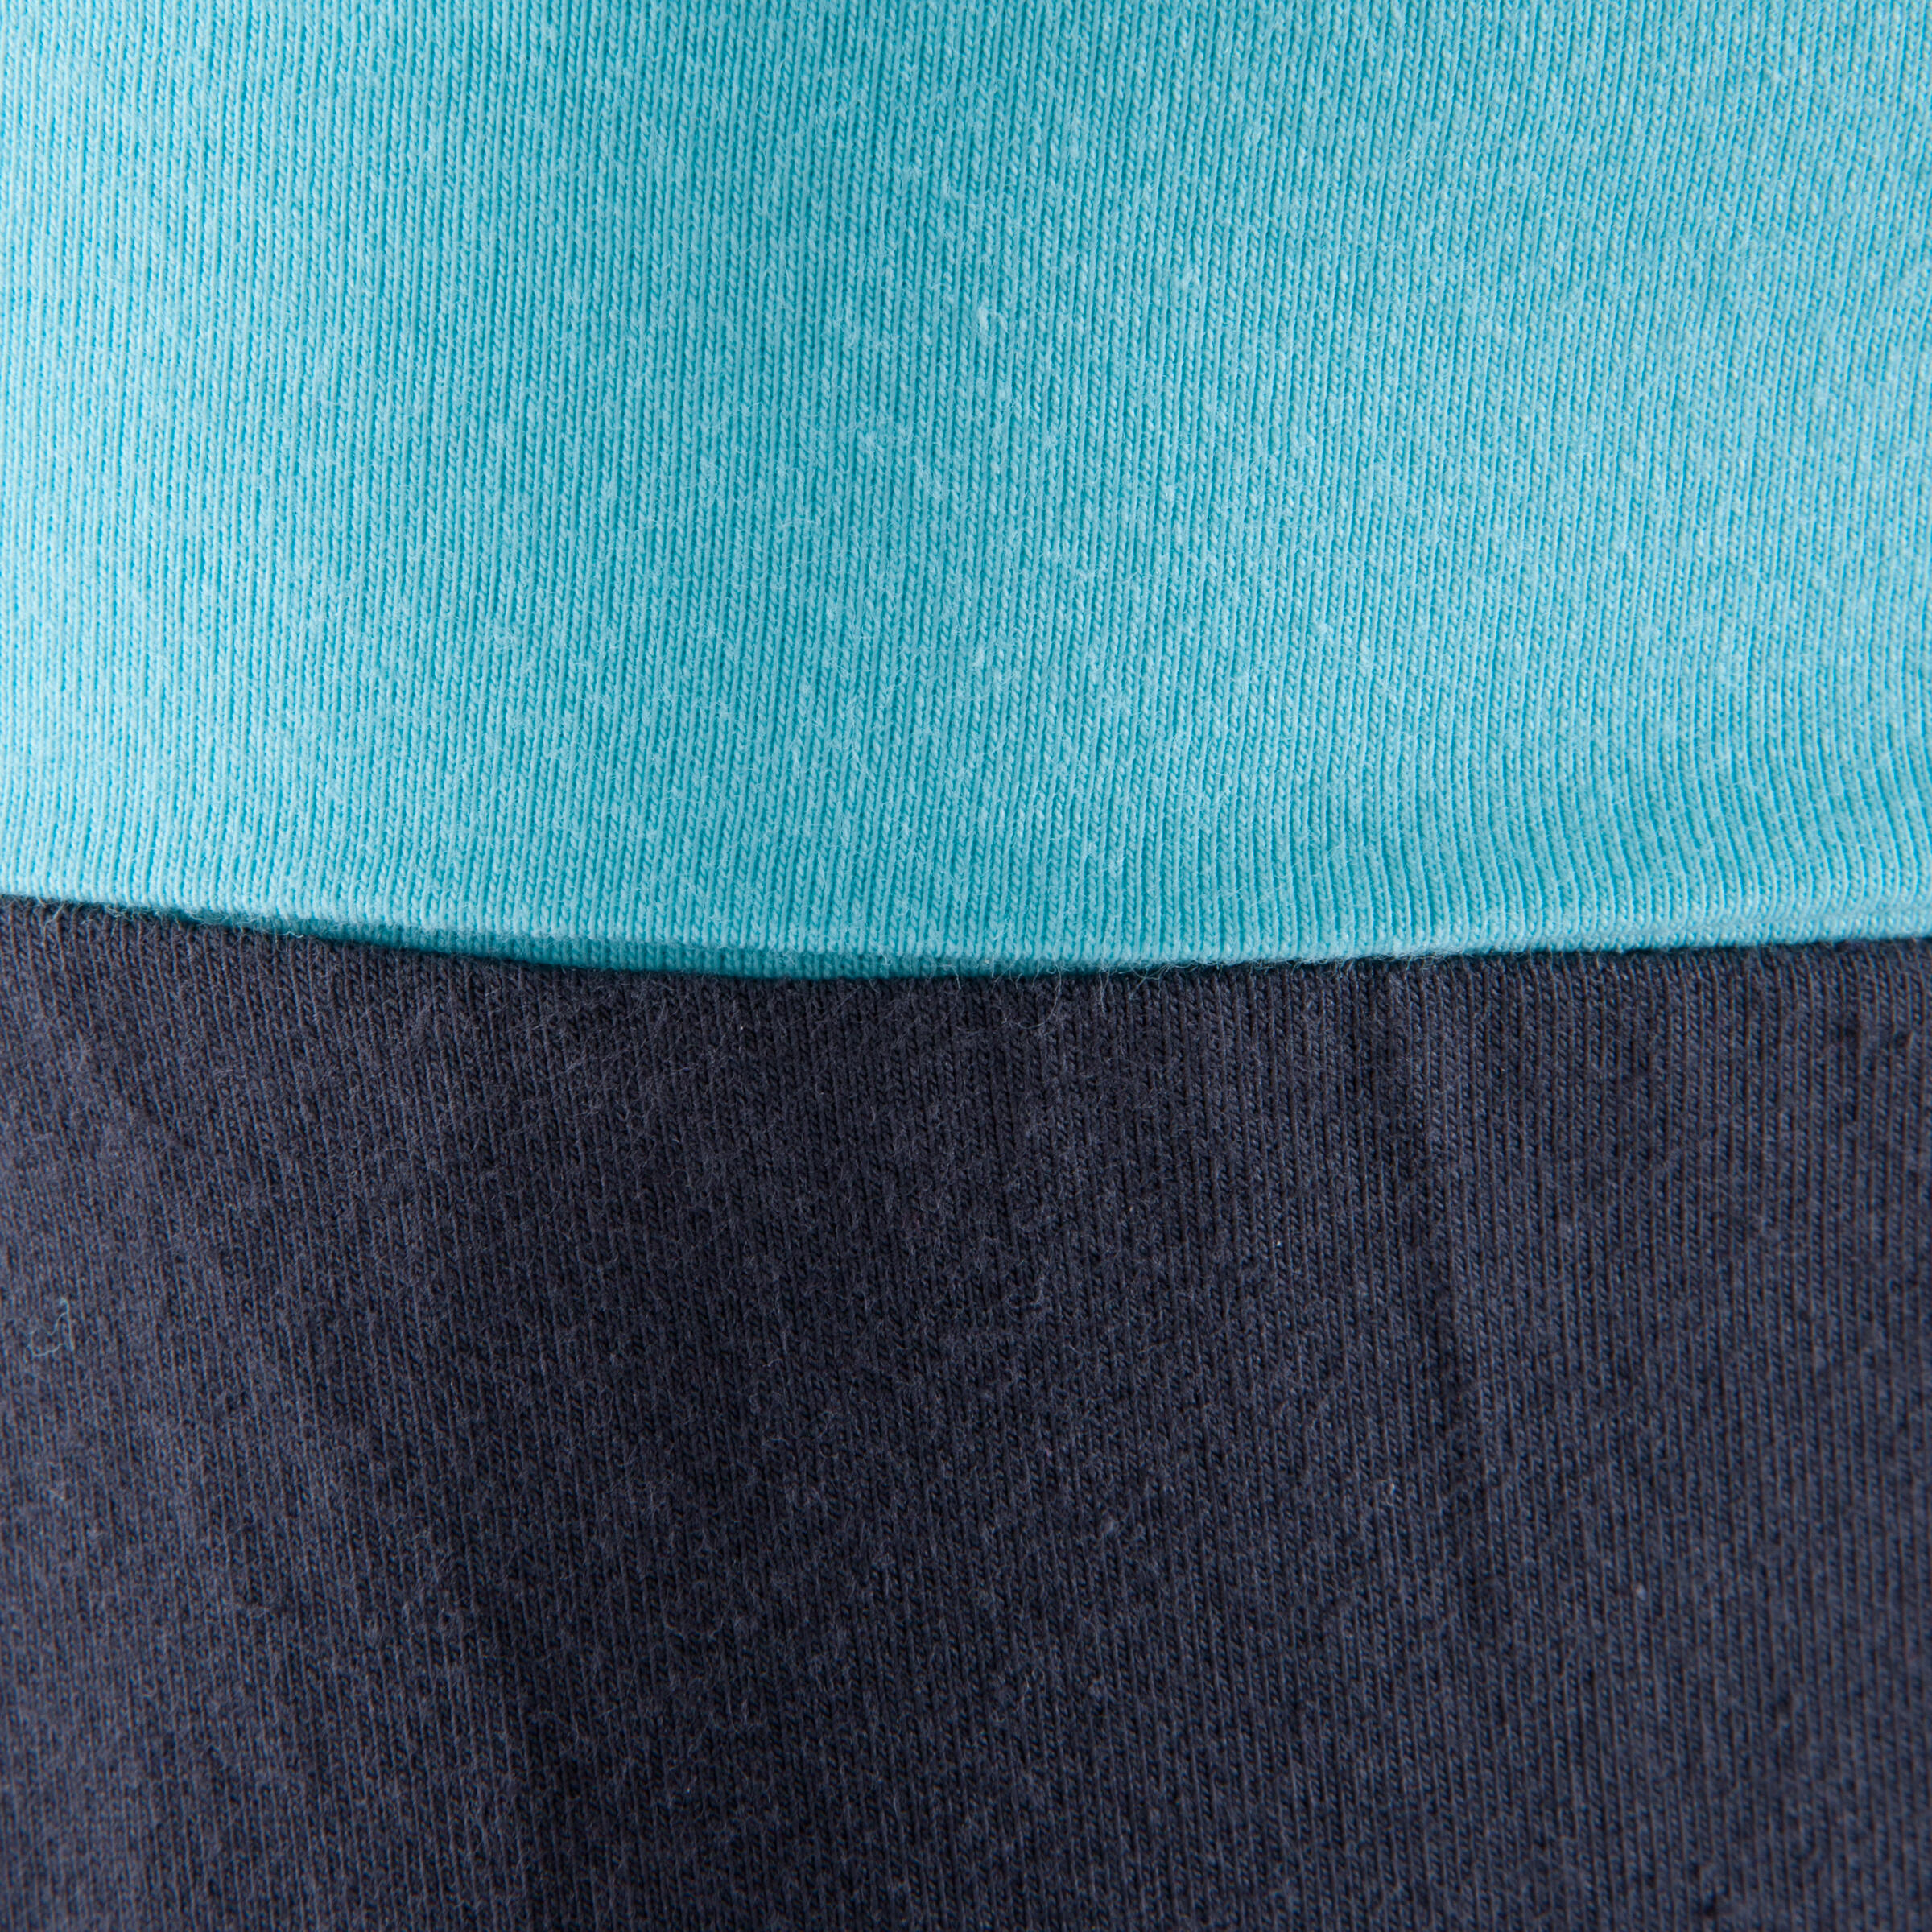 Women's Gentle Gym Yoga and Pilates Organic-Cotton Cropped Bottoms - Grey/Blue 7/10